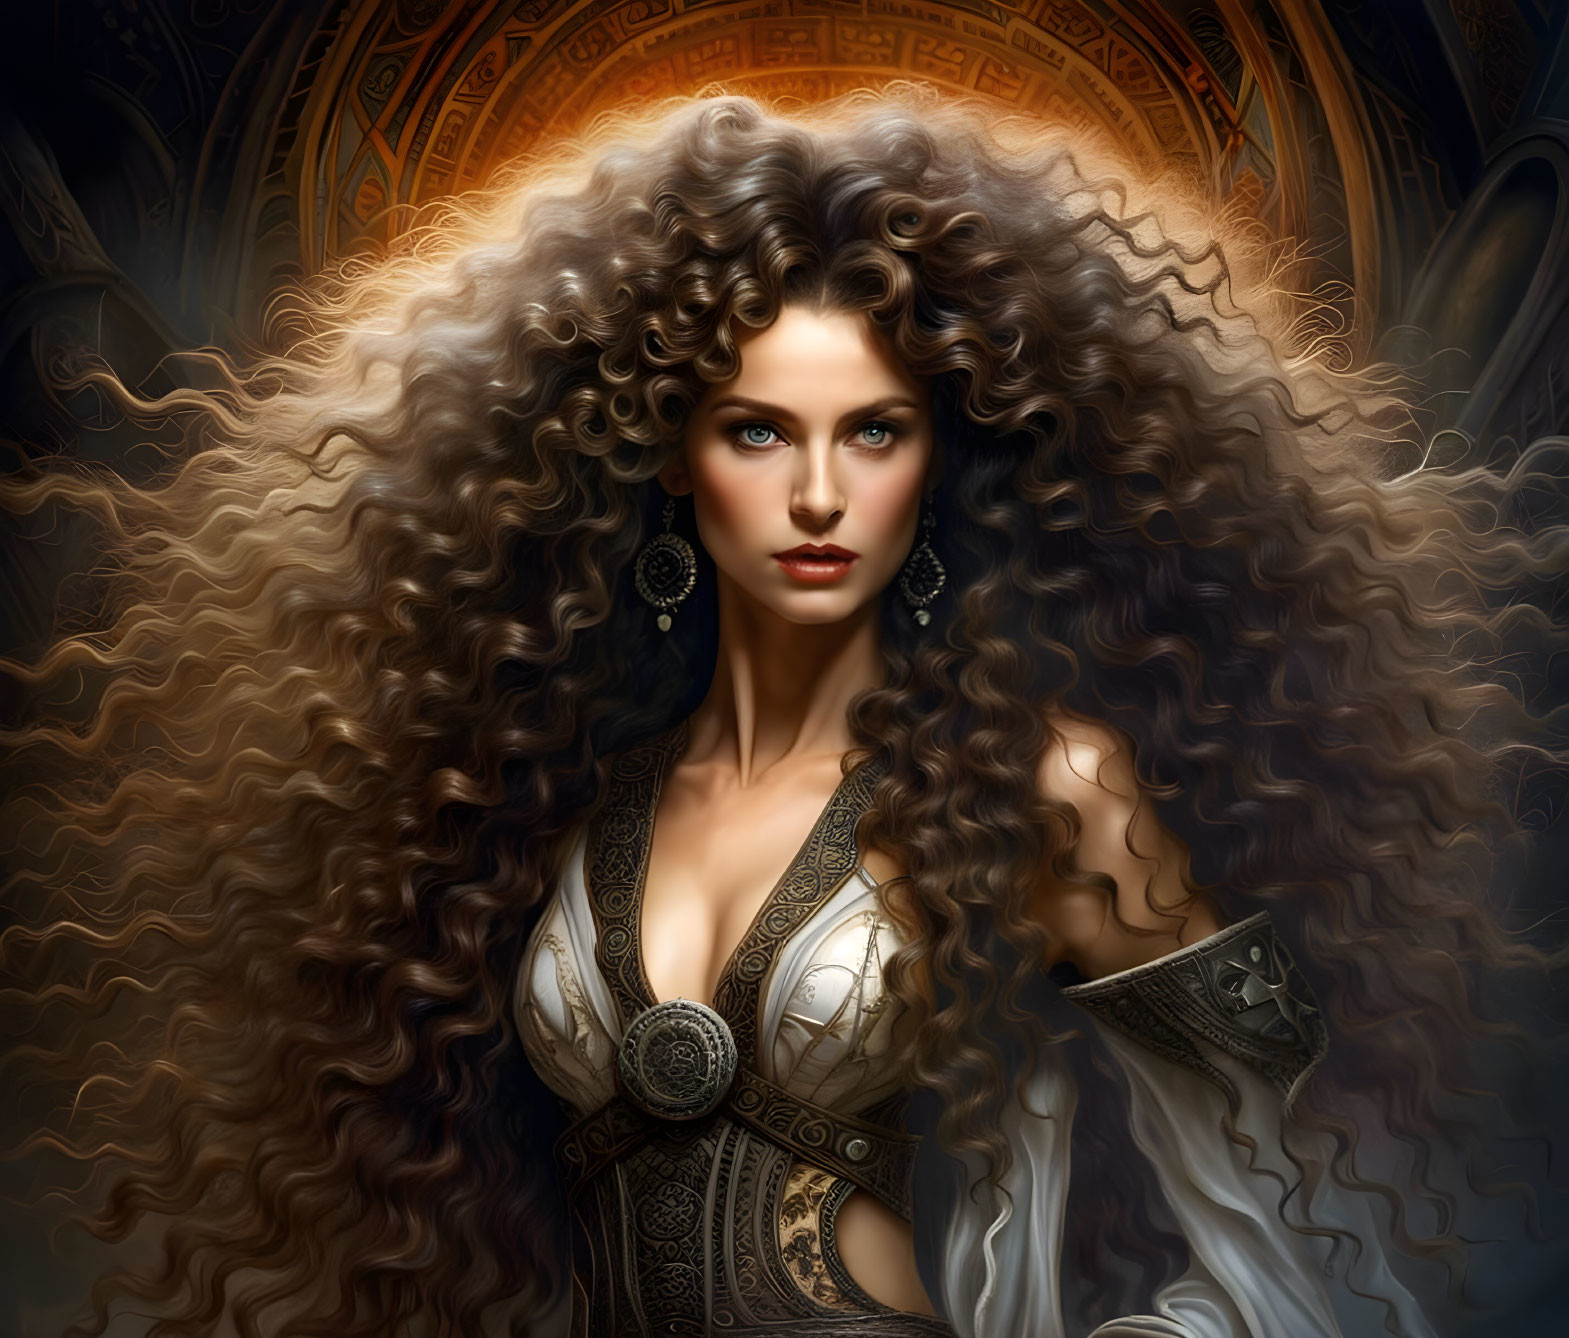 Fantasy digital artwork of a woman with curly hair in ornate attire